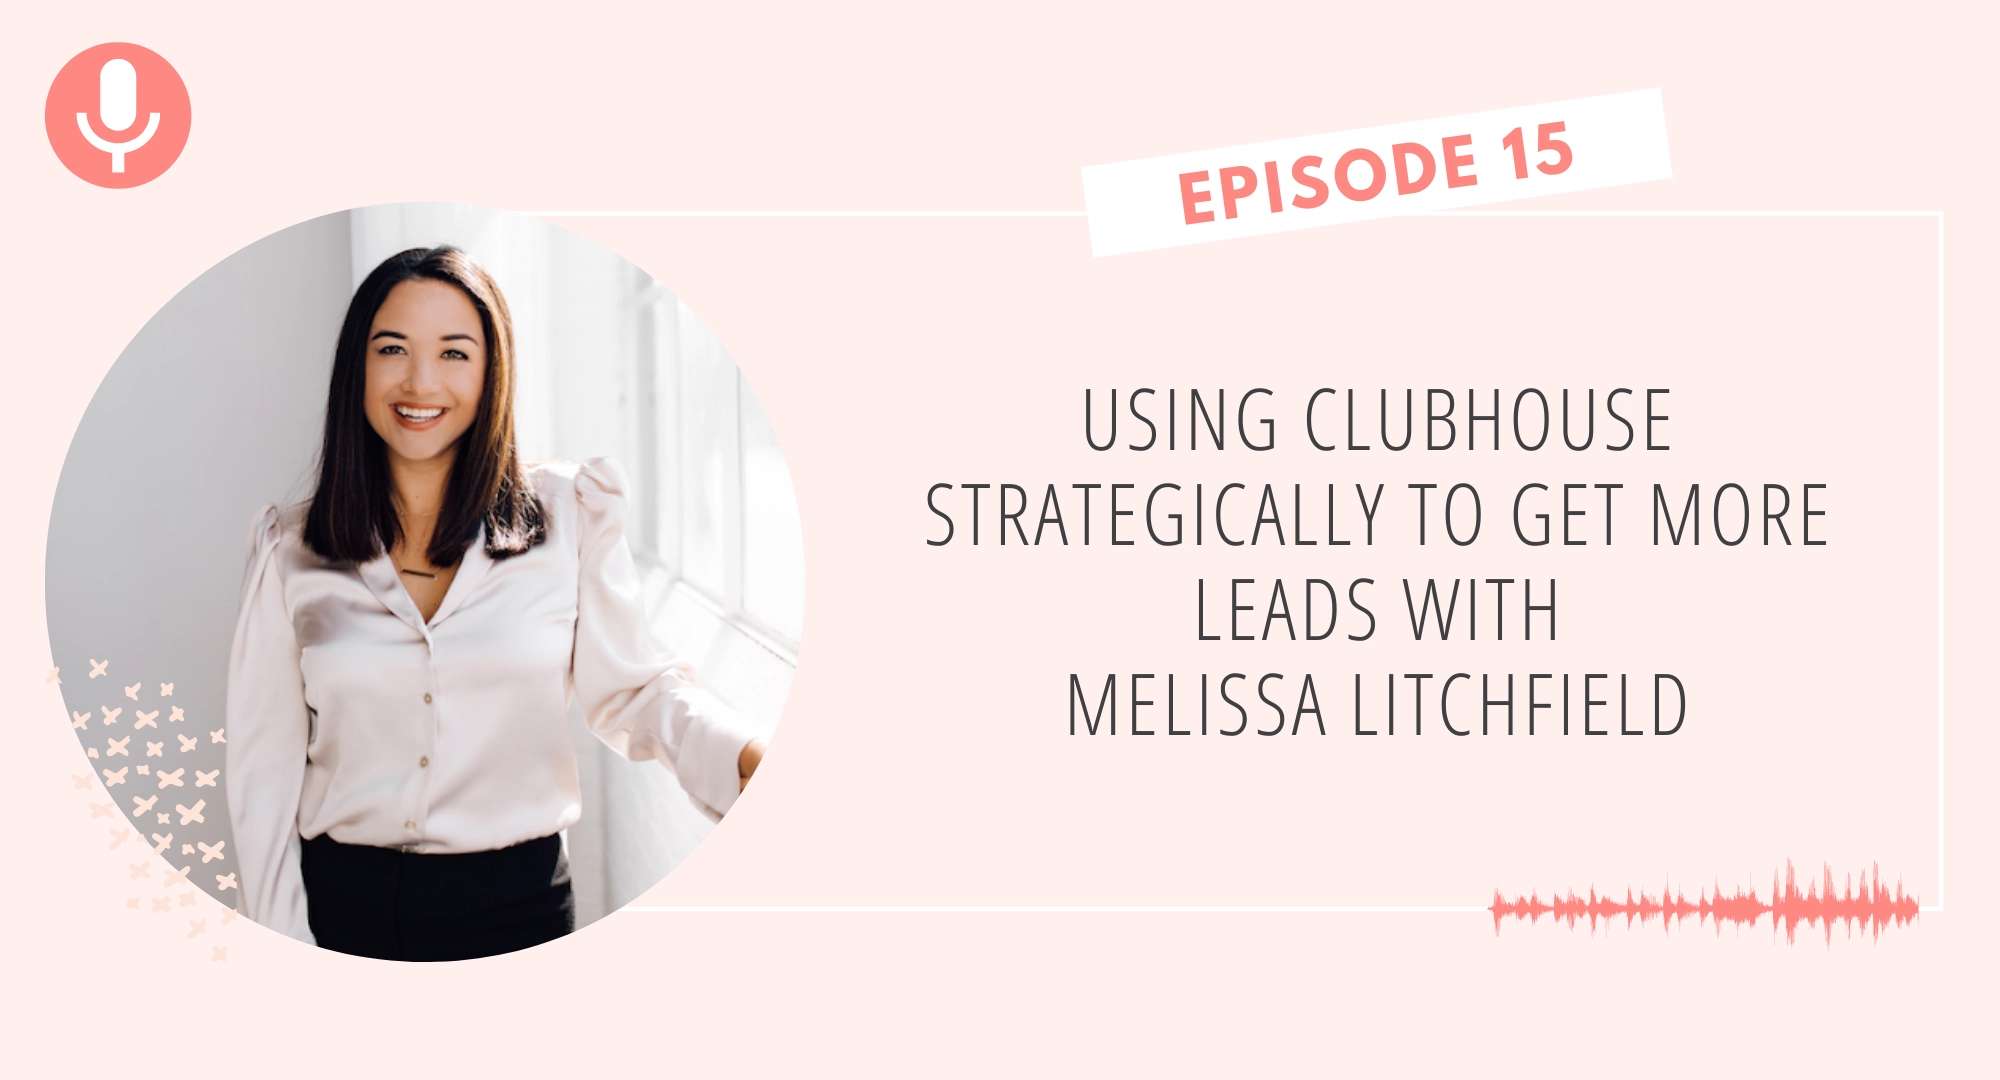 Using Clubhouse Strategically to Get More Leads with Melissa Litchfield